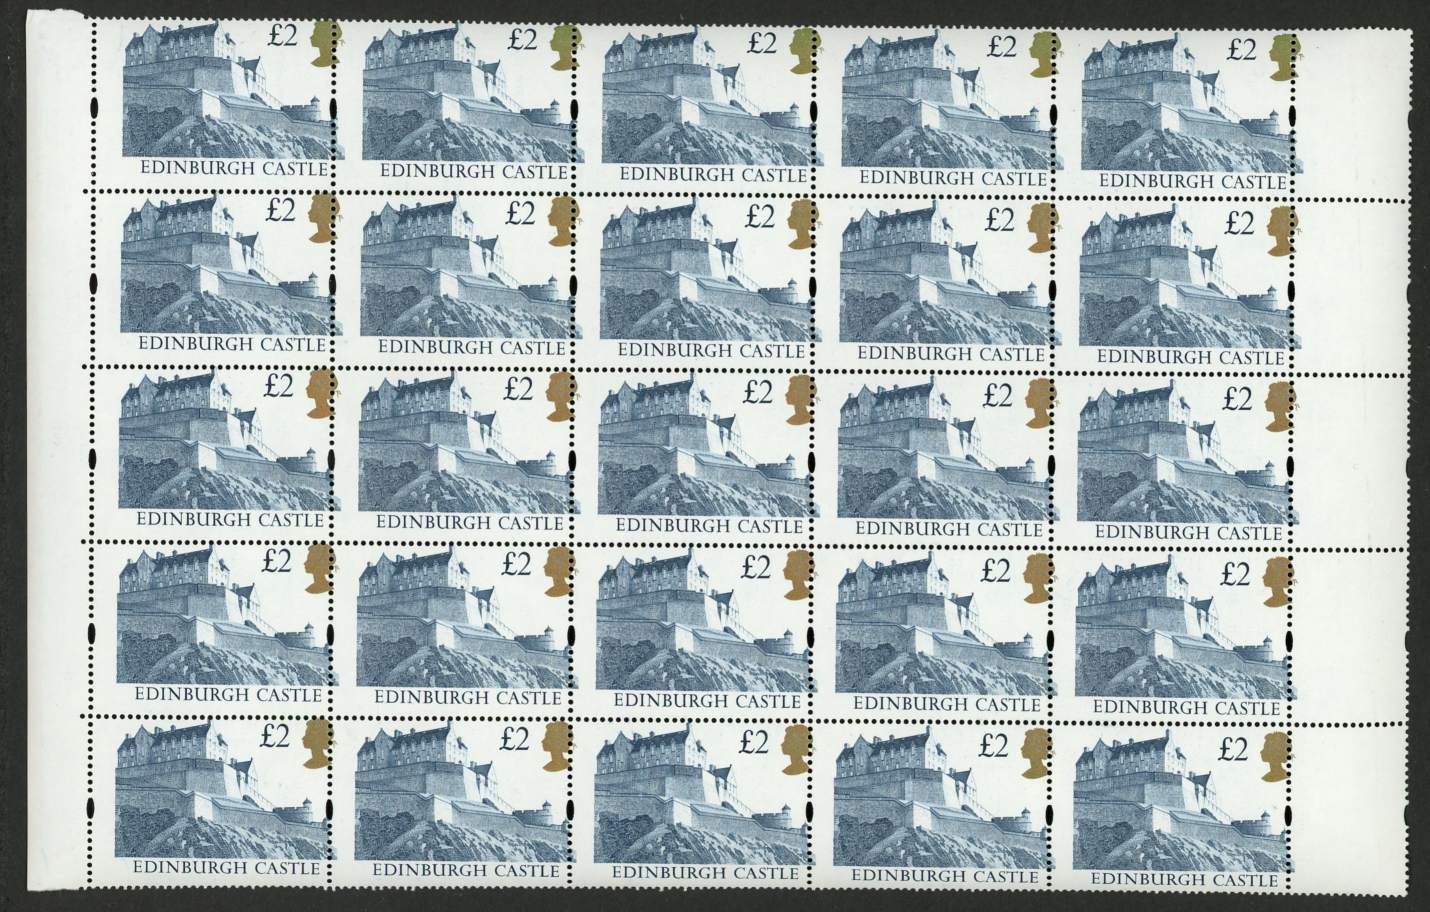 1992 £2 block of 25 with perforation shift varying across the sheet but with perforations through